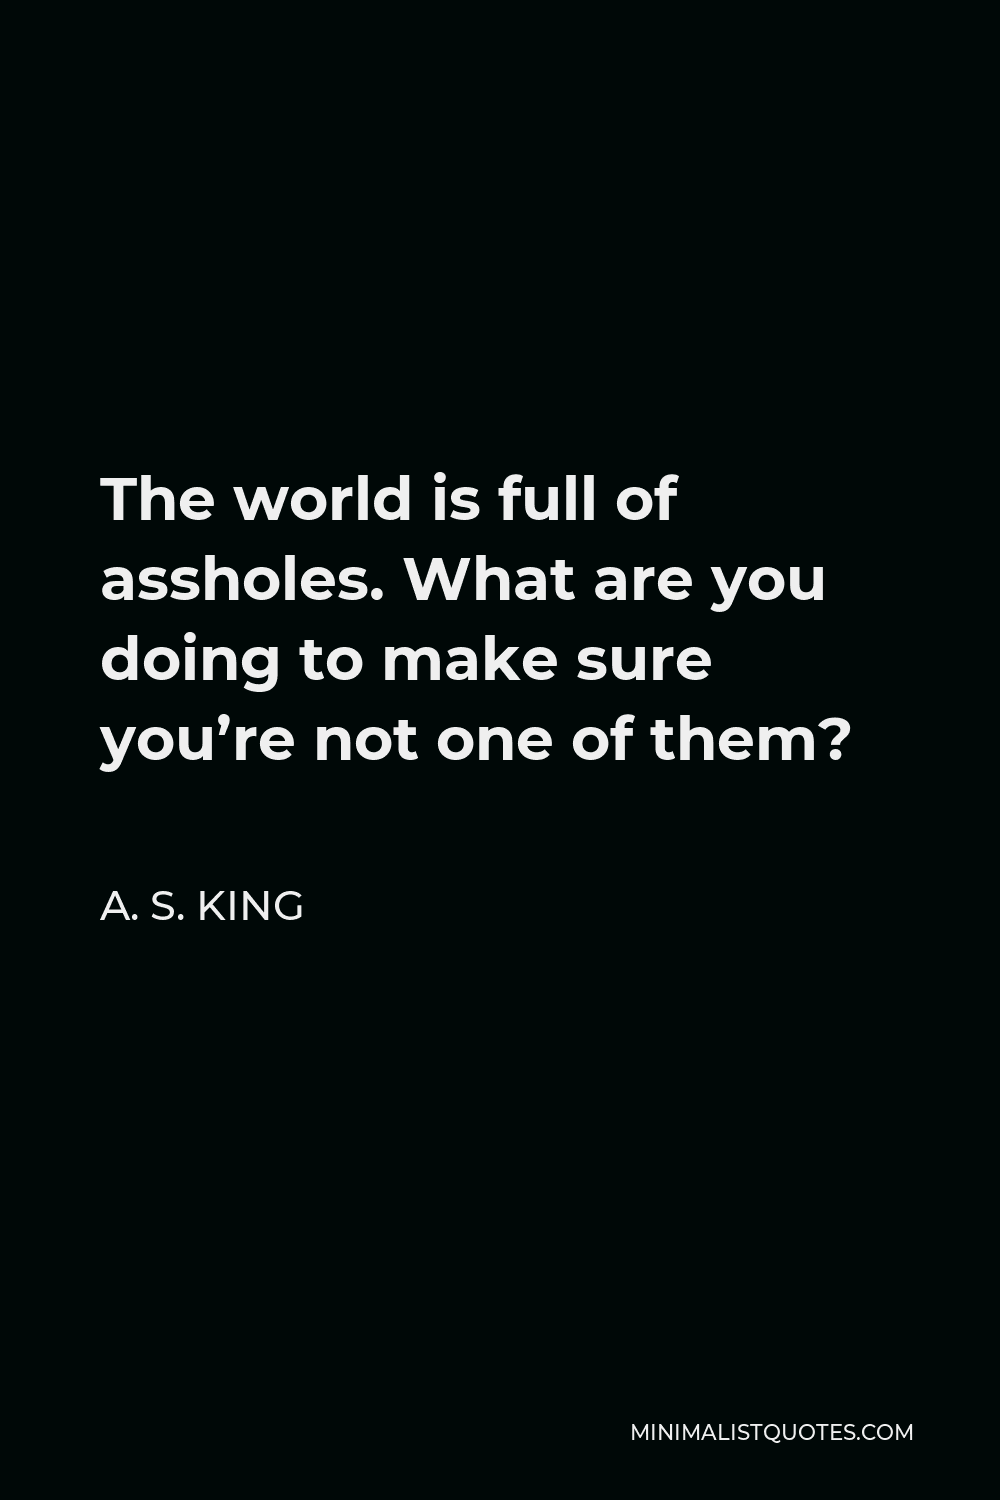 A. S. King Quote - The world is full of assholes. What are you doing to make sure you’re not one of them?